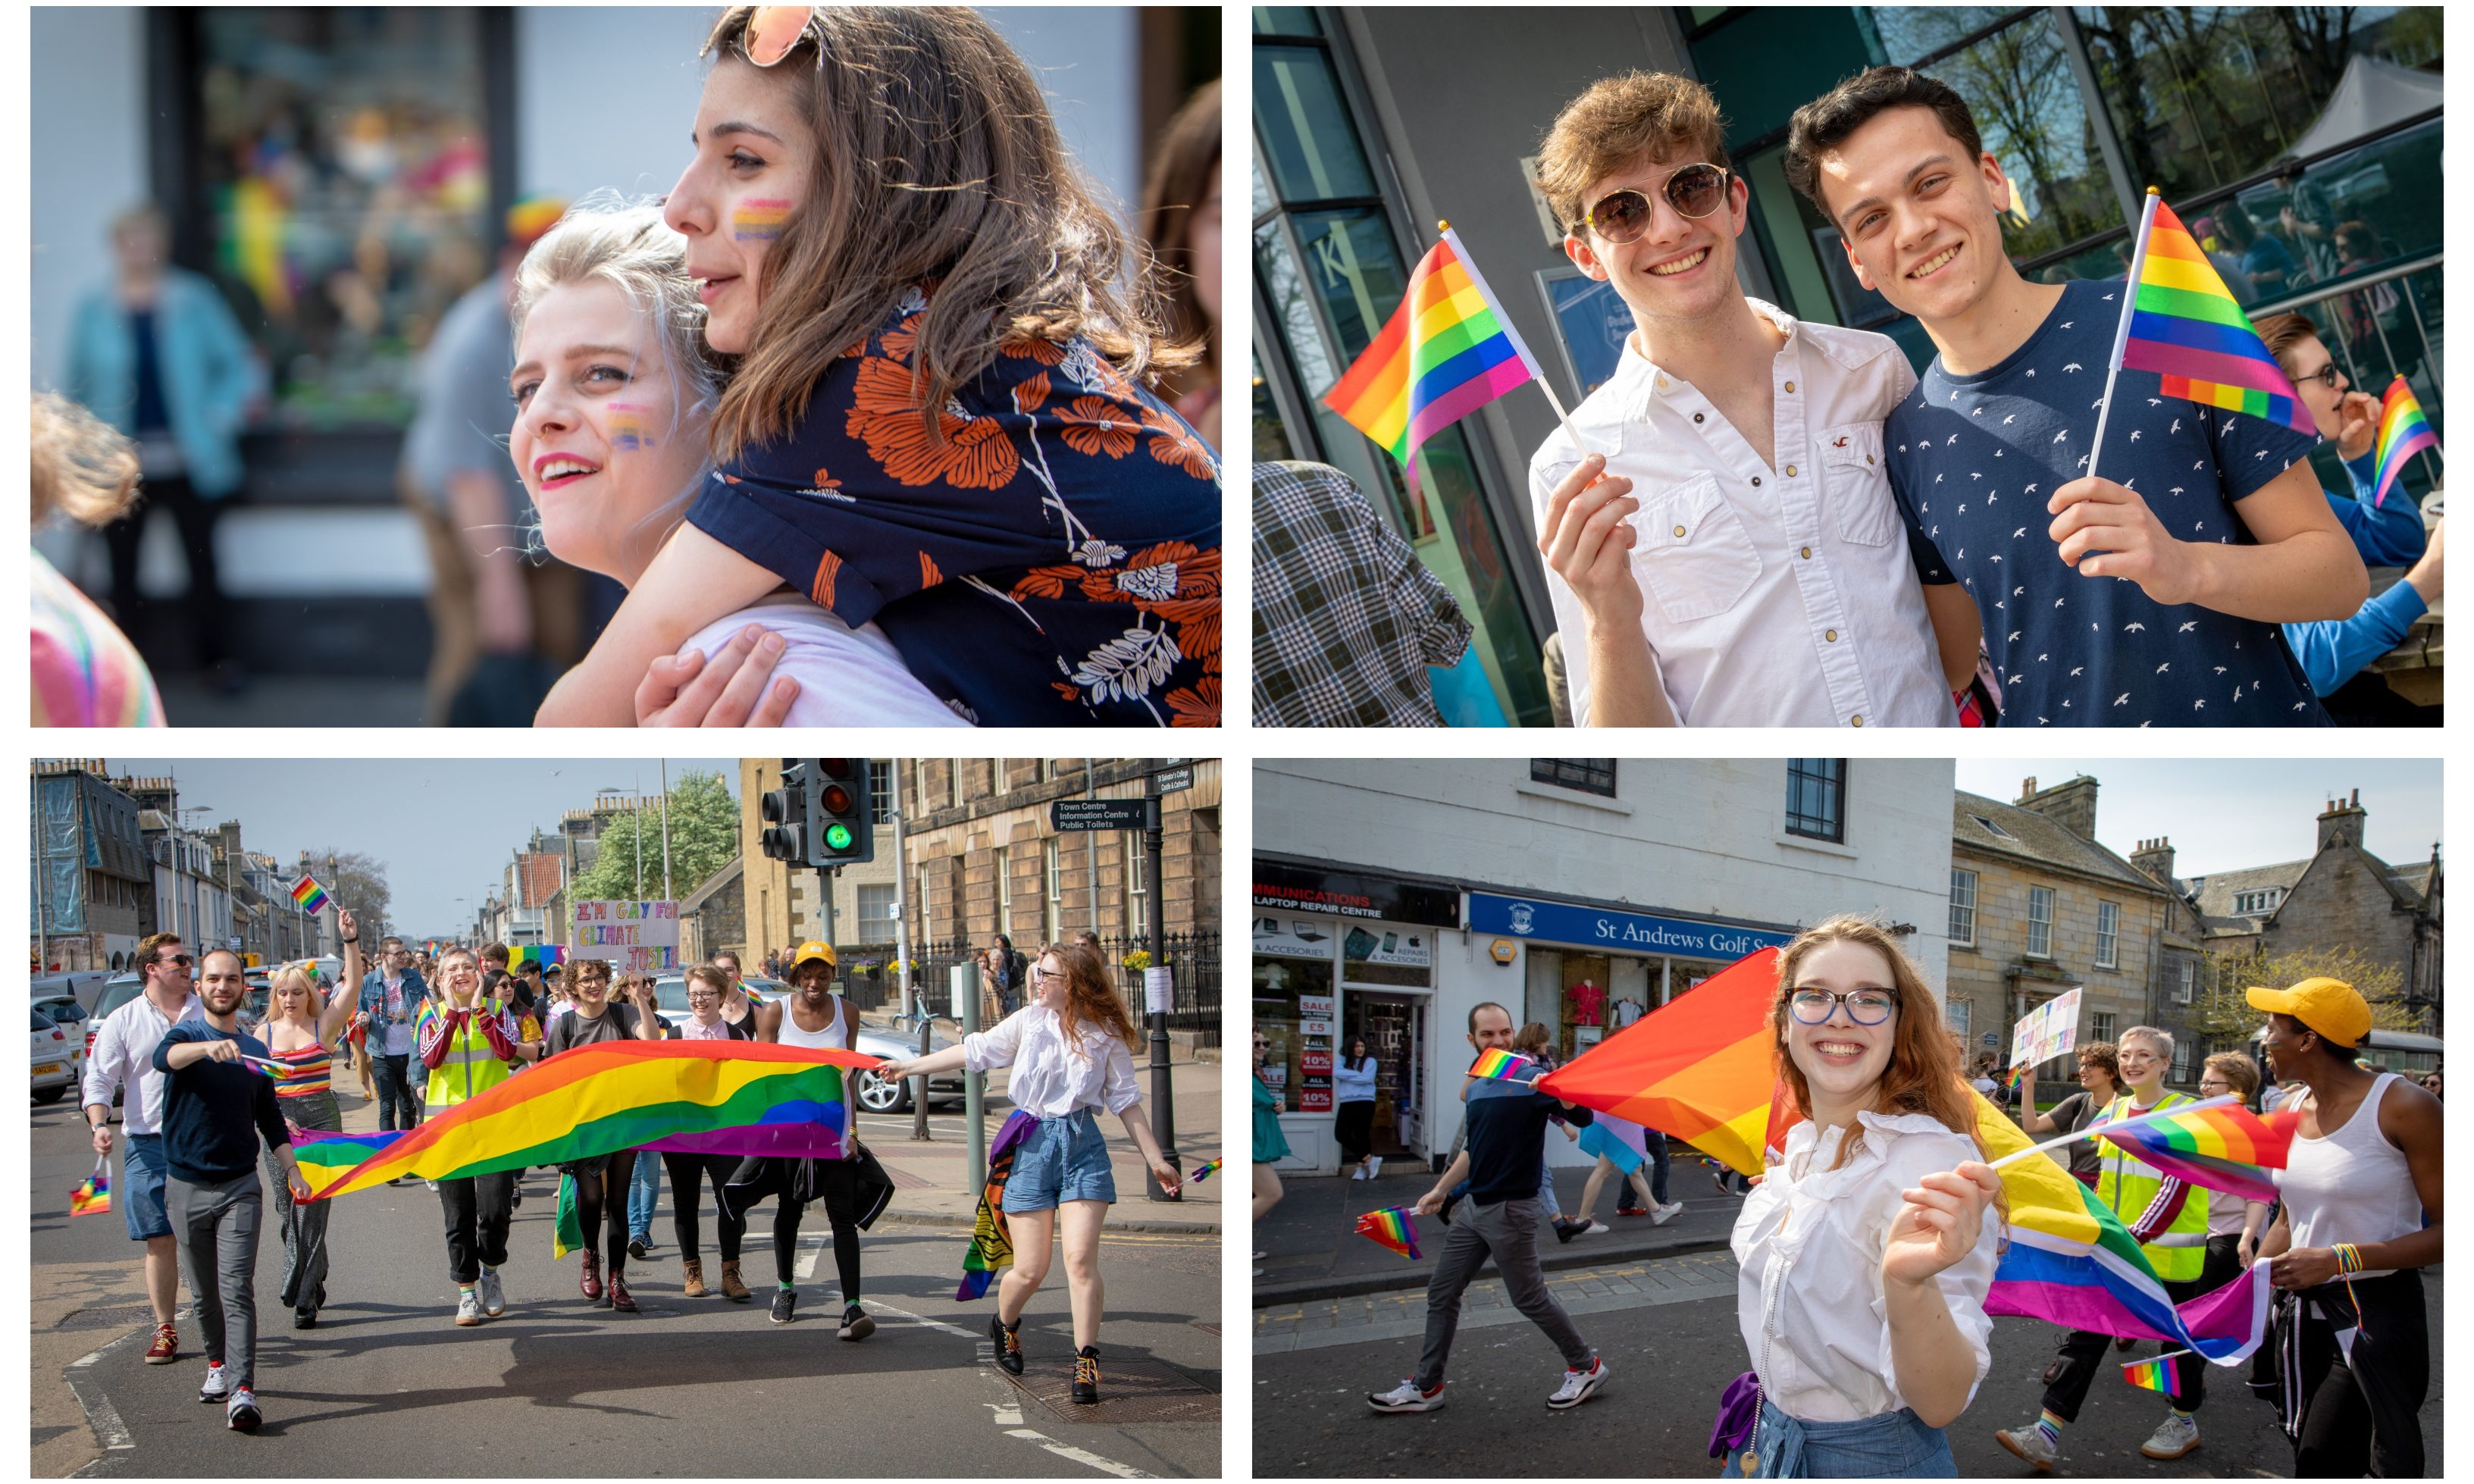 The 2019 Pride parade in St Andrews.